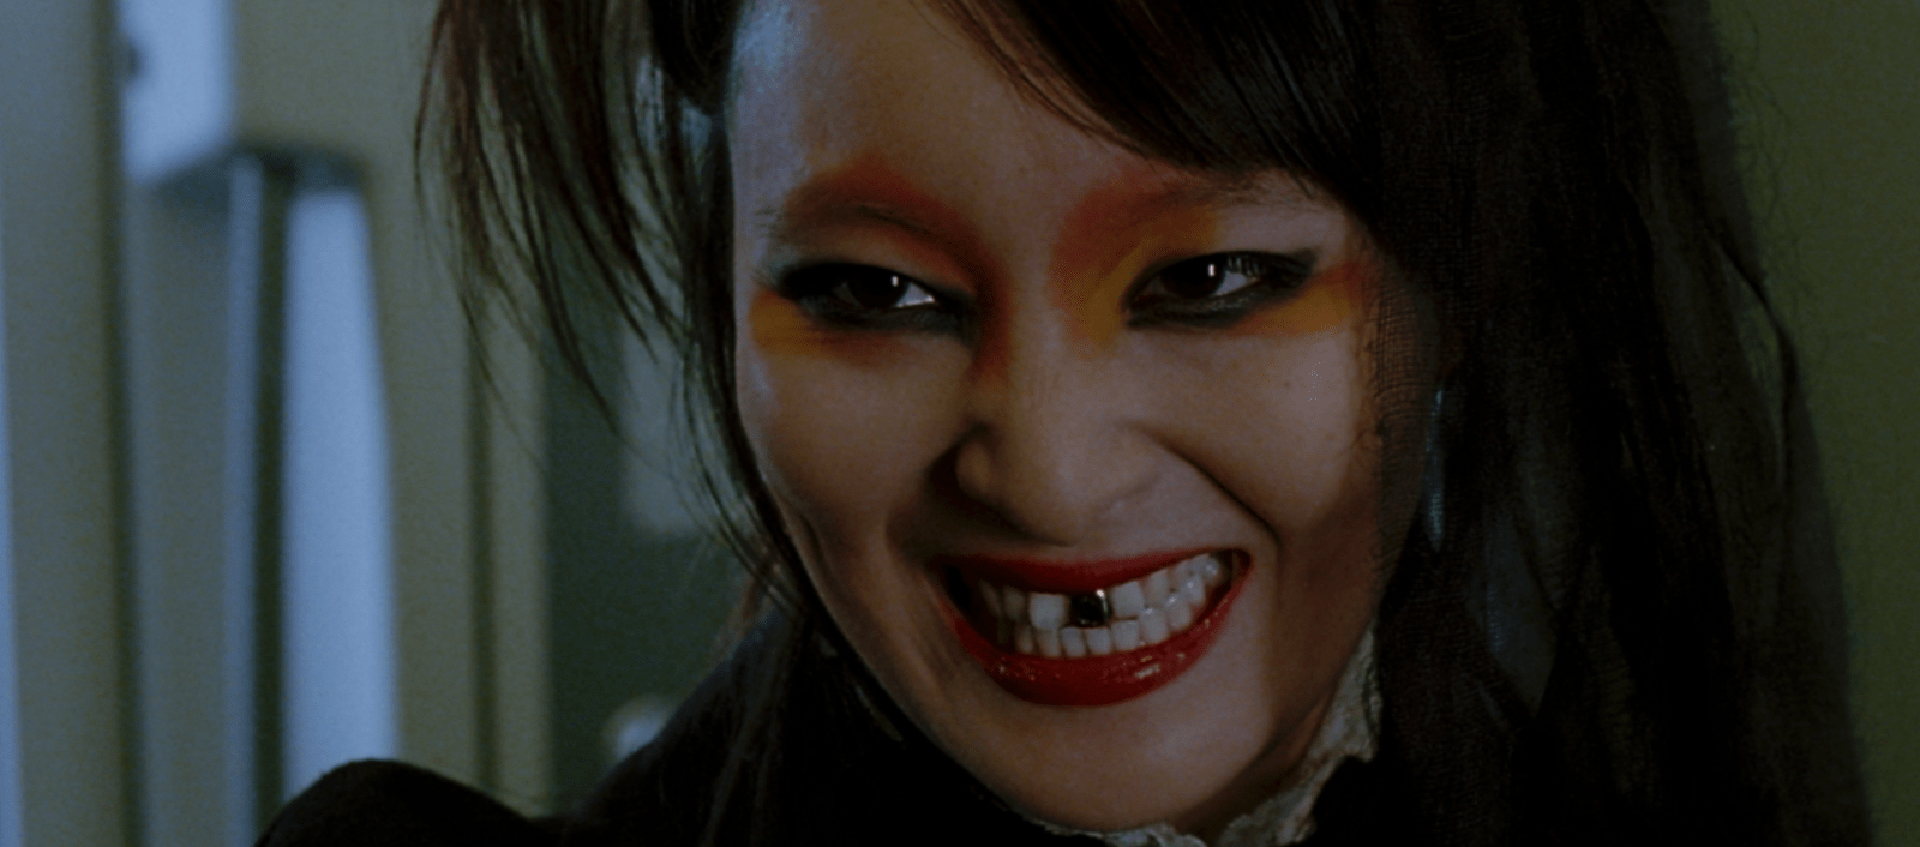 A close-up of a woman with an evil grin. She has dark hair and dark eye makeup. One of her front teeth is made of gold. 